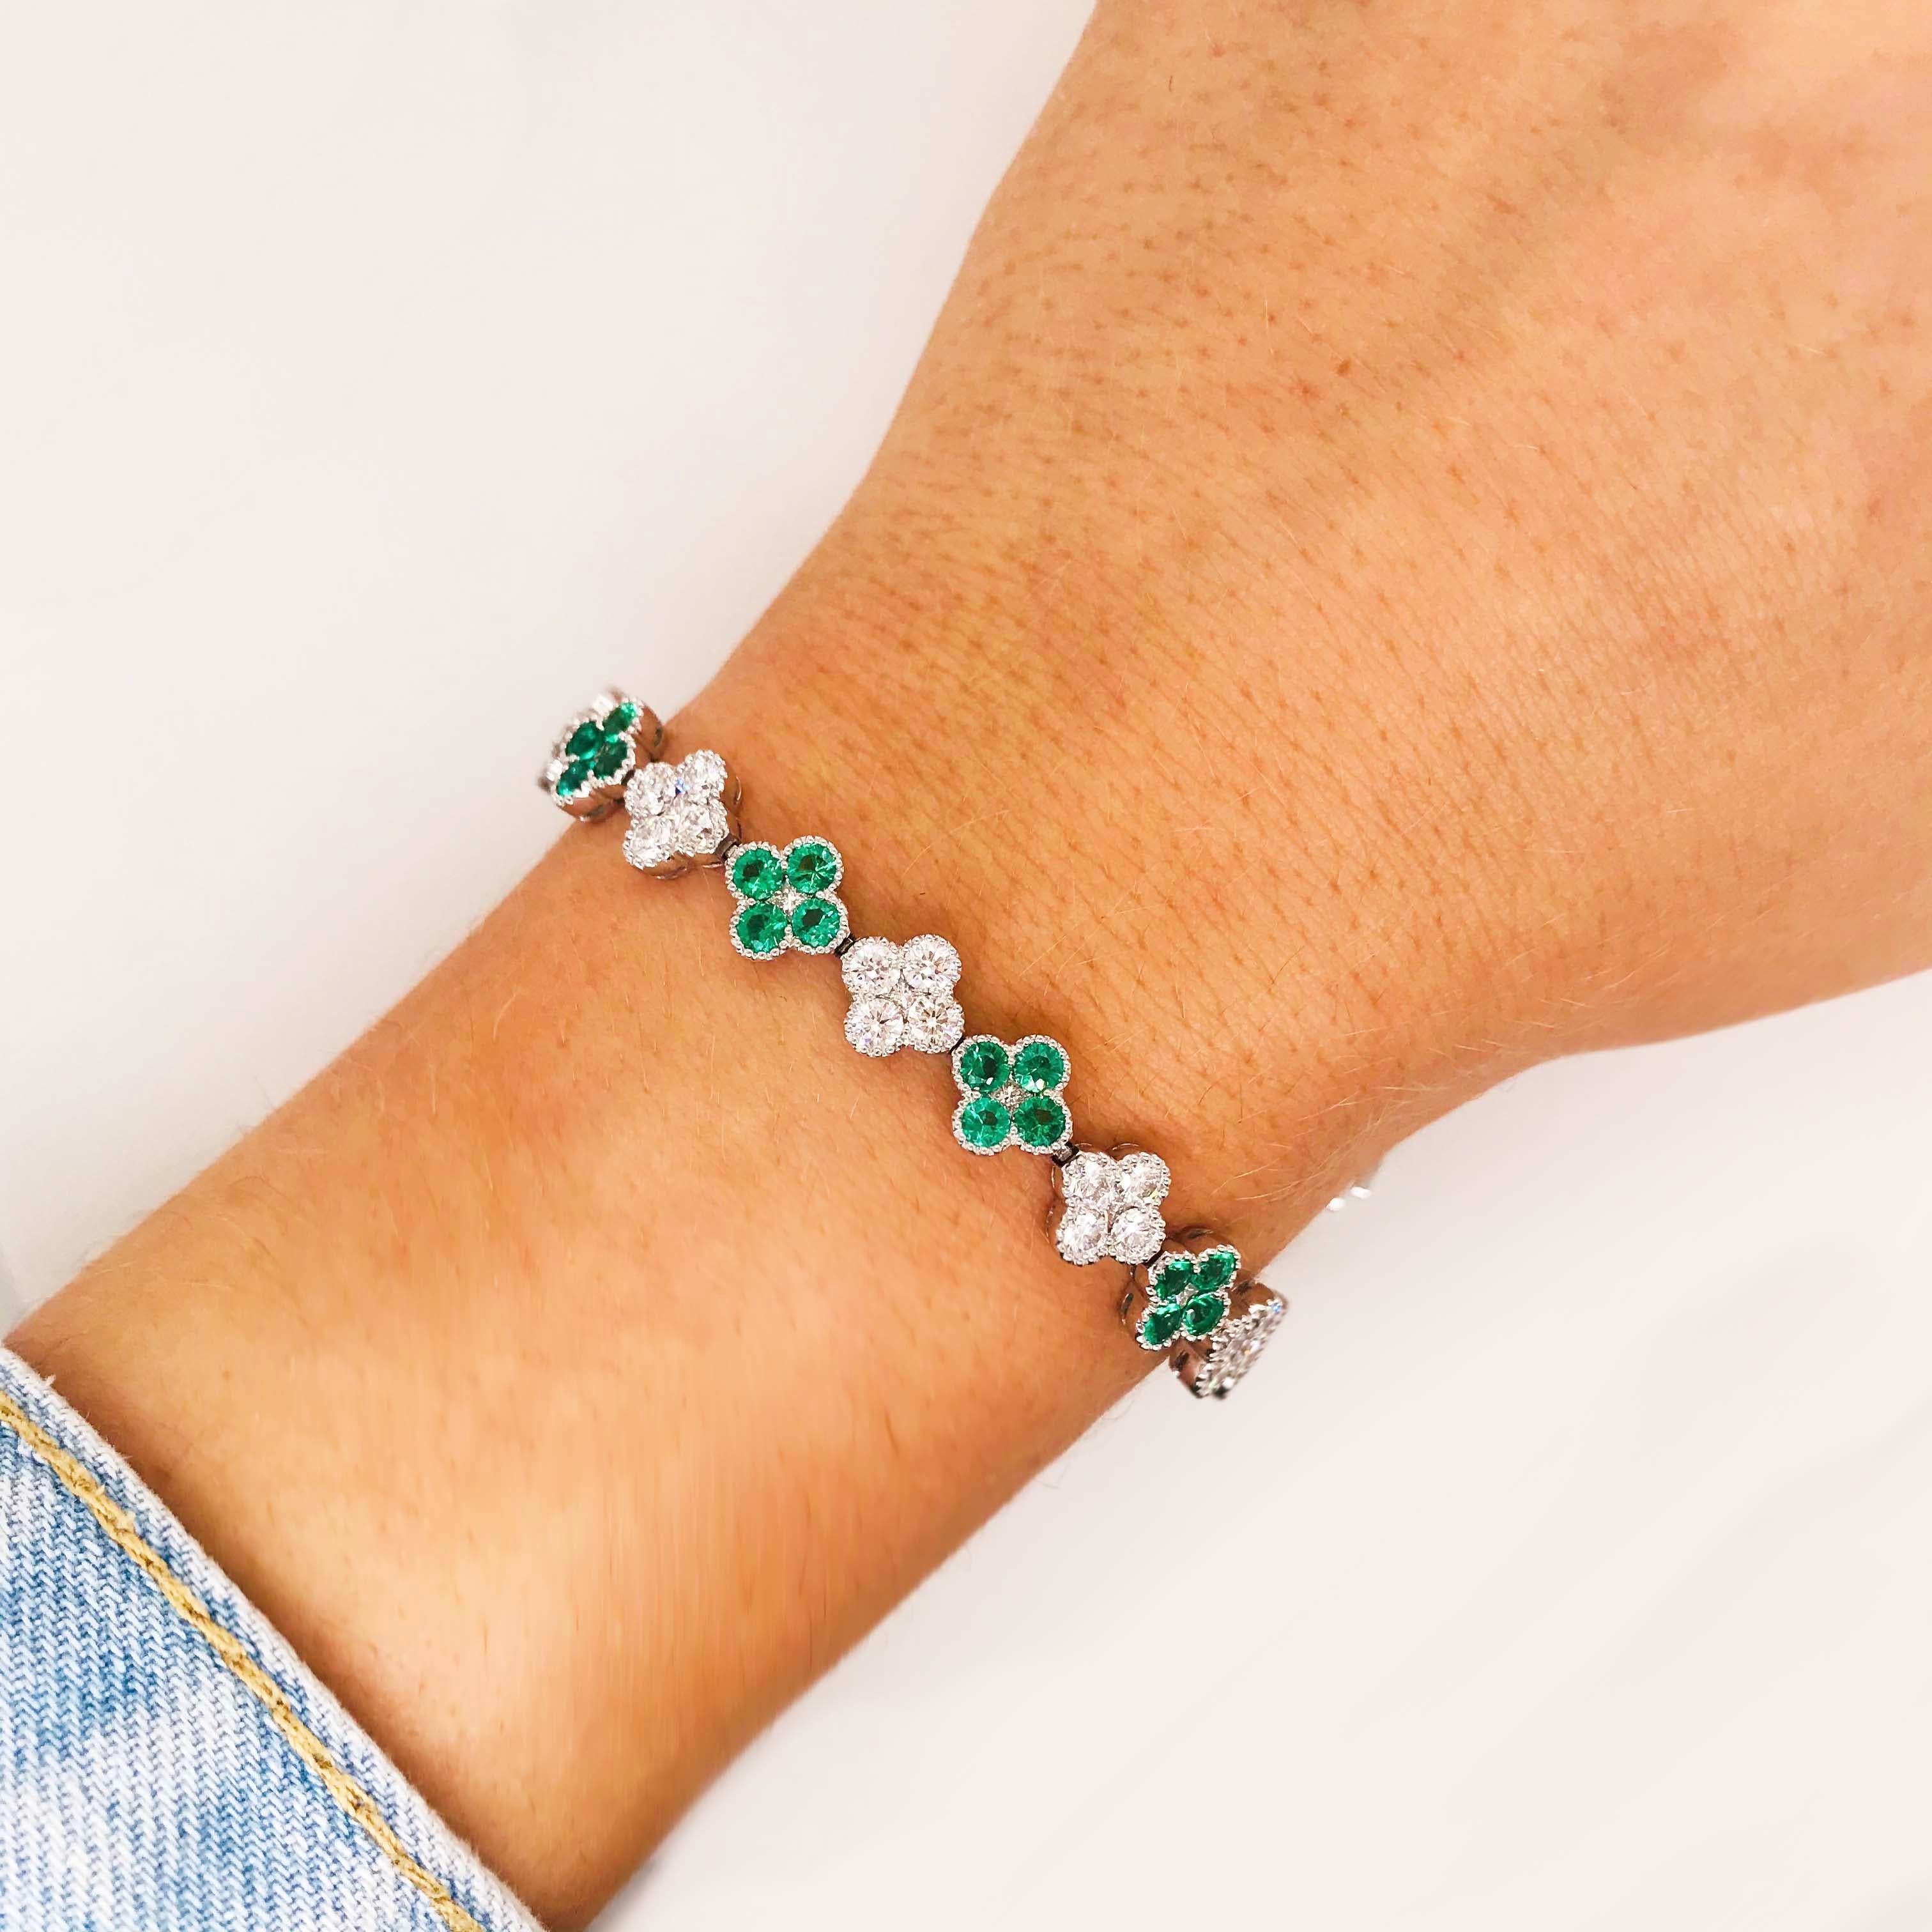 This is a stunning bracelet made for the one who brings light and luck into your life! Emerald is the birthstone of May making this the perfect gift for any May birthday or May anniversary! 
Bracelet:
Bracelet Type: Tennis Bracelet
Metal Quality: